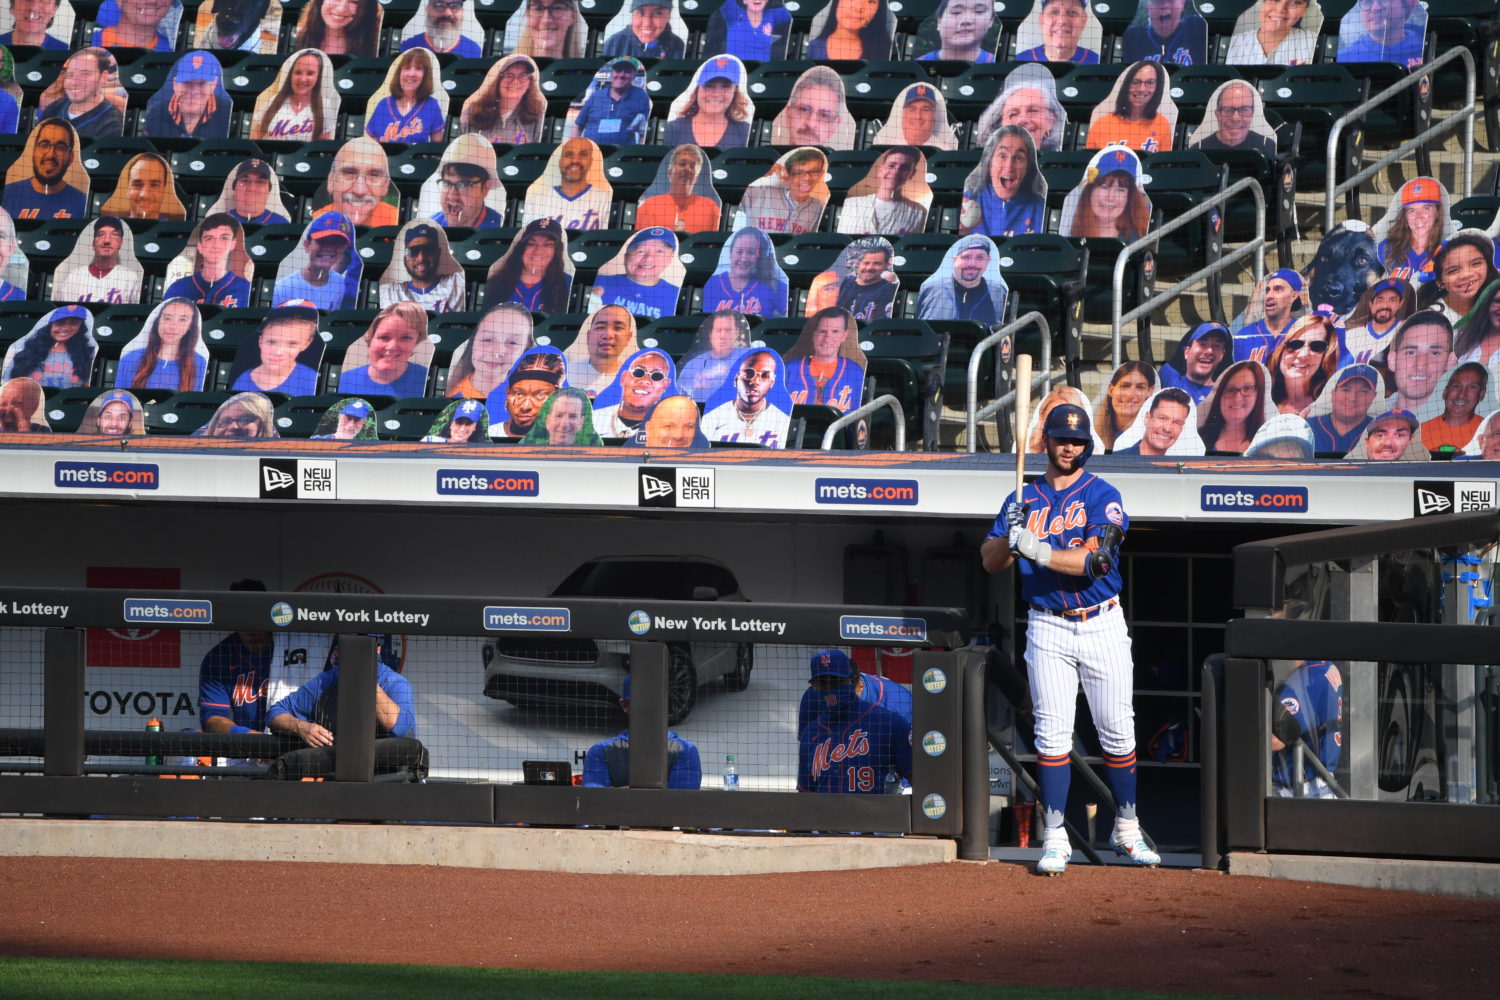 Mets Fans Cutouts During COVID-19